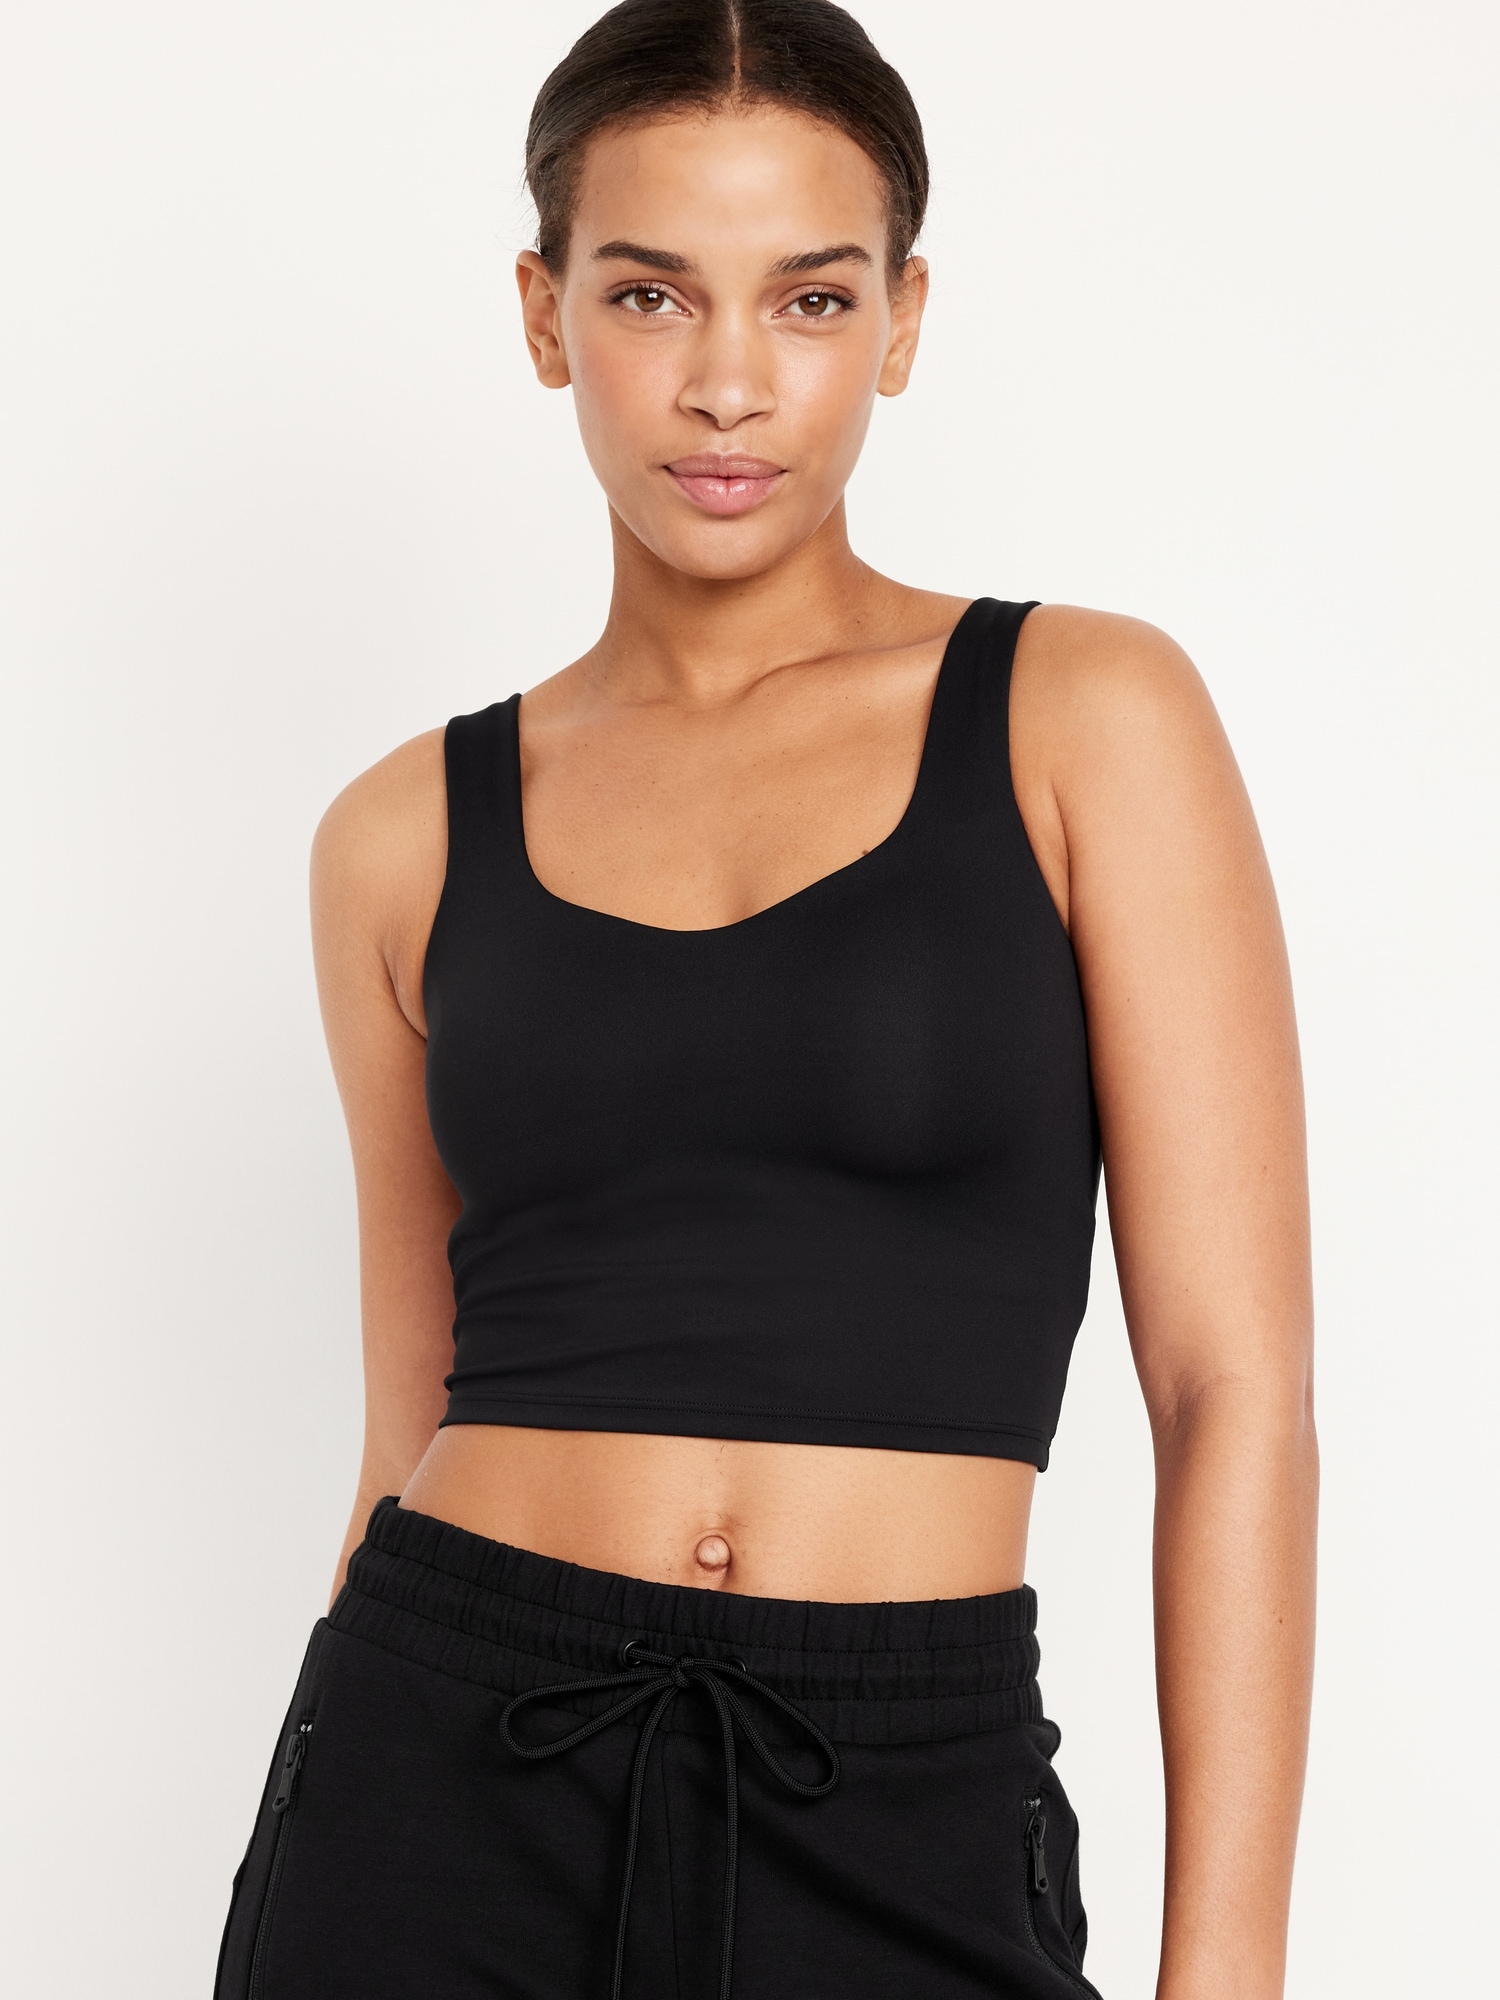 Old Navy Active Cropped Tank Top Built In Bra Black Size Large NWT 